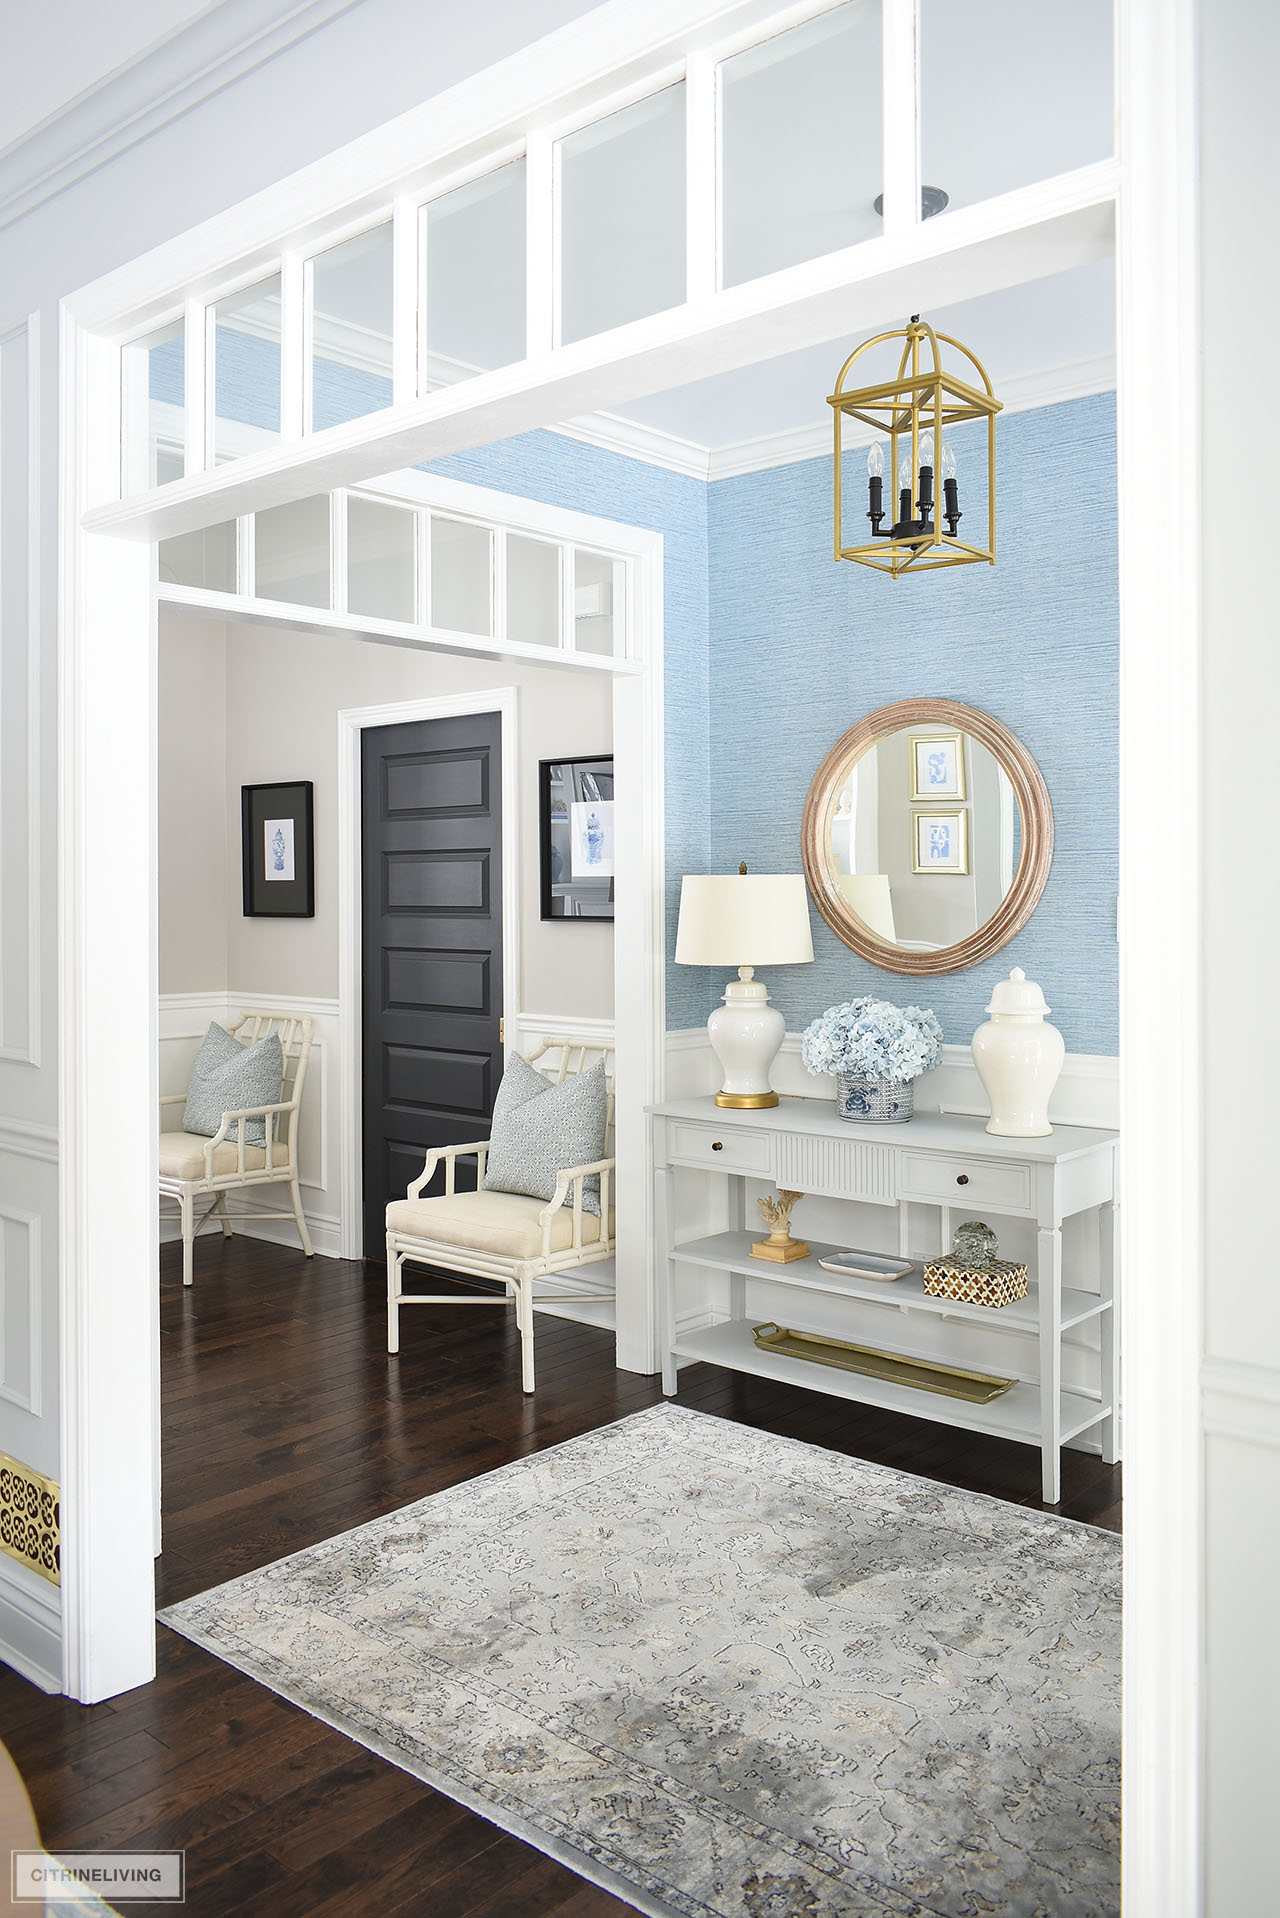 Beautiful and elegant entryway spring decor with a light blue and white color platte.